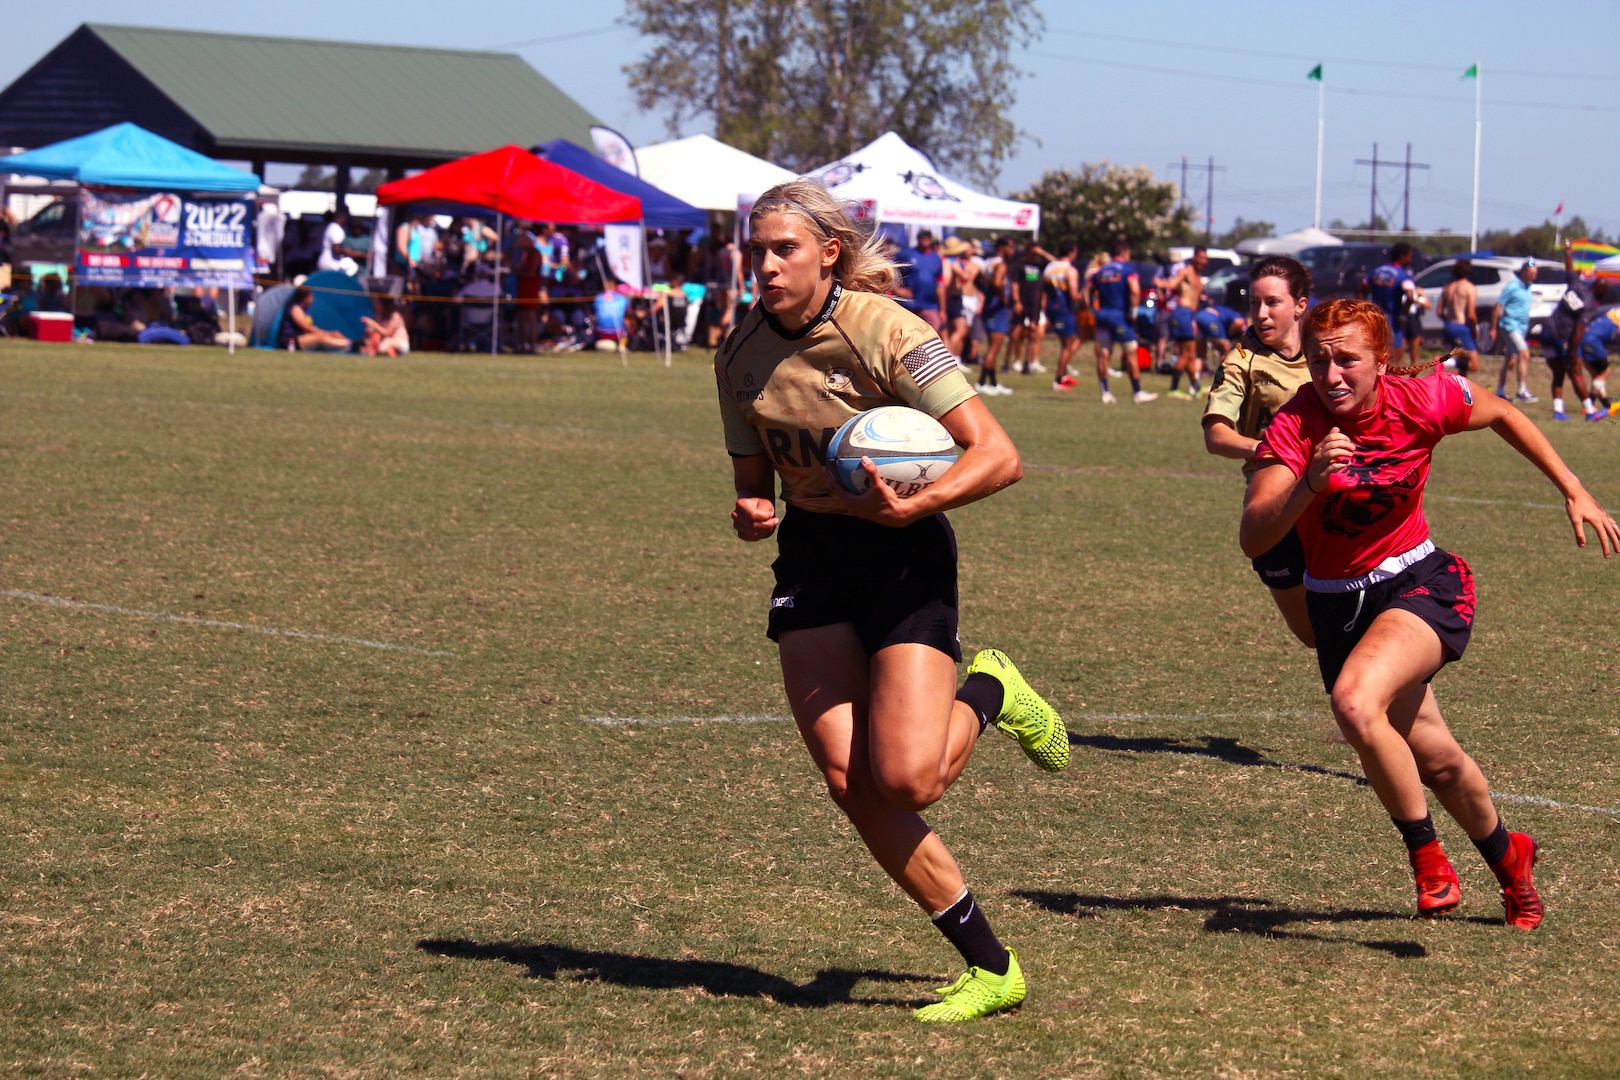 2023 ARMED FORCES WOMENS RUGBY CHAMPIONSHIP AT CAPE FEAR 7su003e Armed Forces Sportsu003e Article View